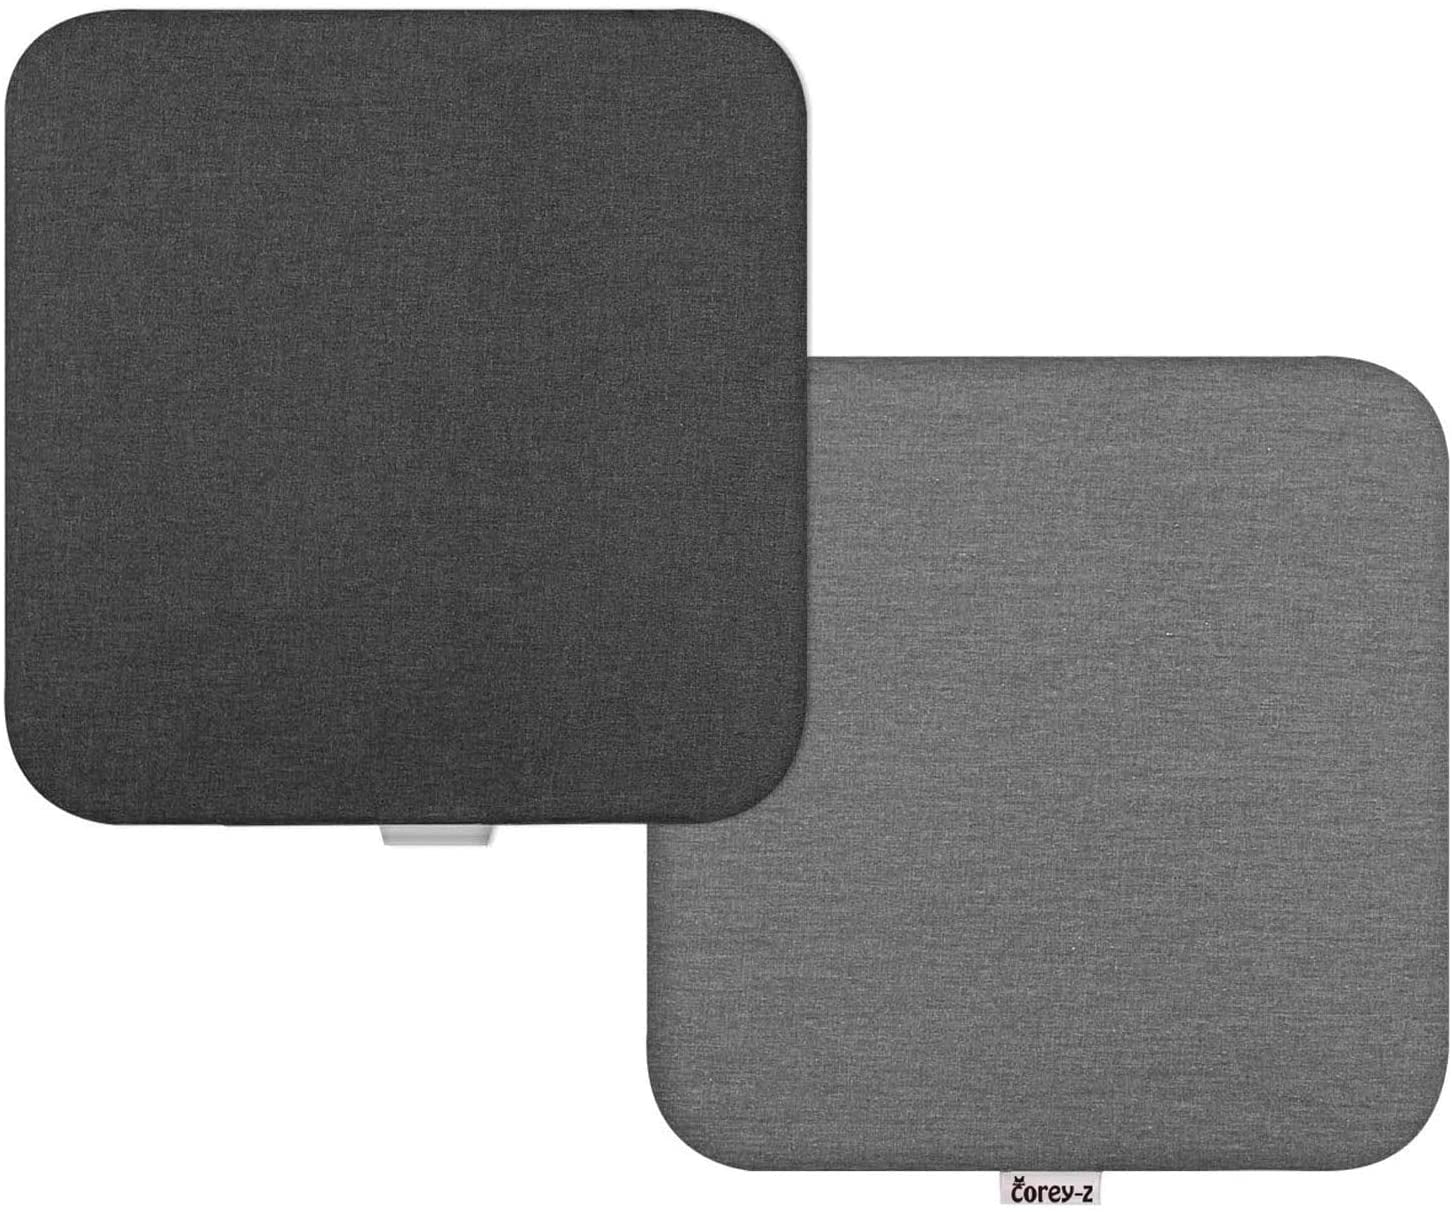 Corey-z Heat Press Mat for Cricut EasyPress Machines(12x12 inch) for HTV Craft Vinyl Ironing Insulation Transfer Projects, Gray